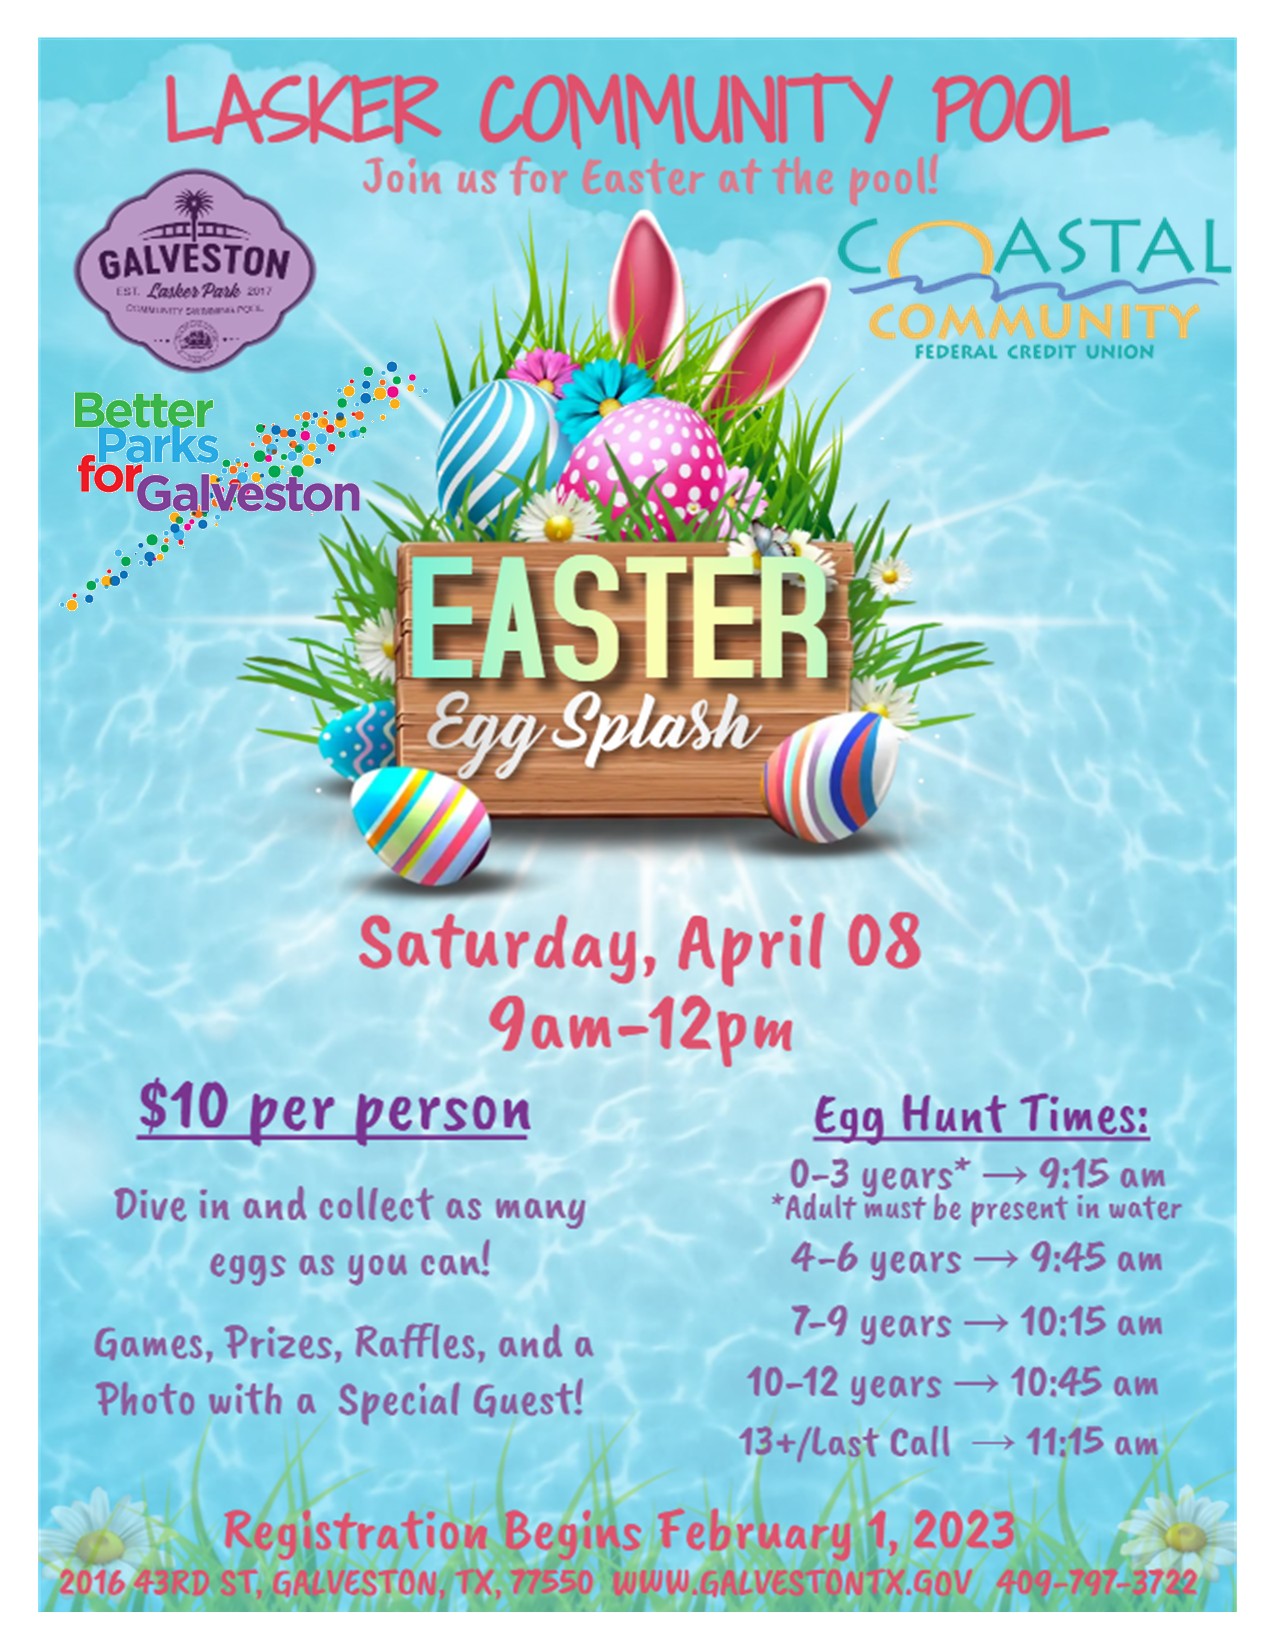 Easter Egg Splash - Saturday, April 8 9am-12pm | Lasker Commmunity Pool - Join us for Easter at the pool! | $10 per person | Registration begins February 1, 2023